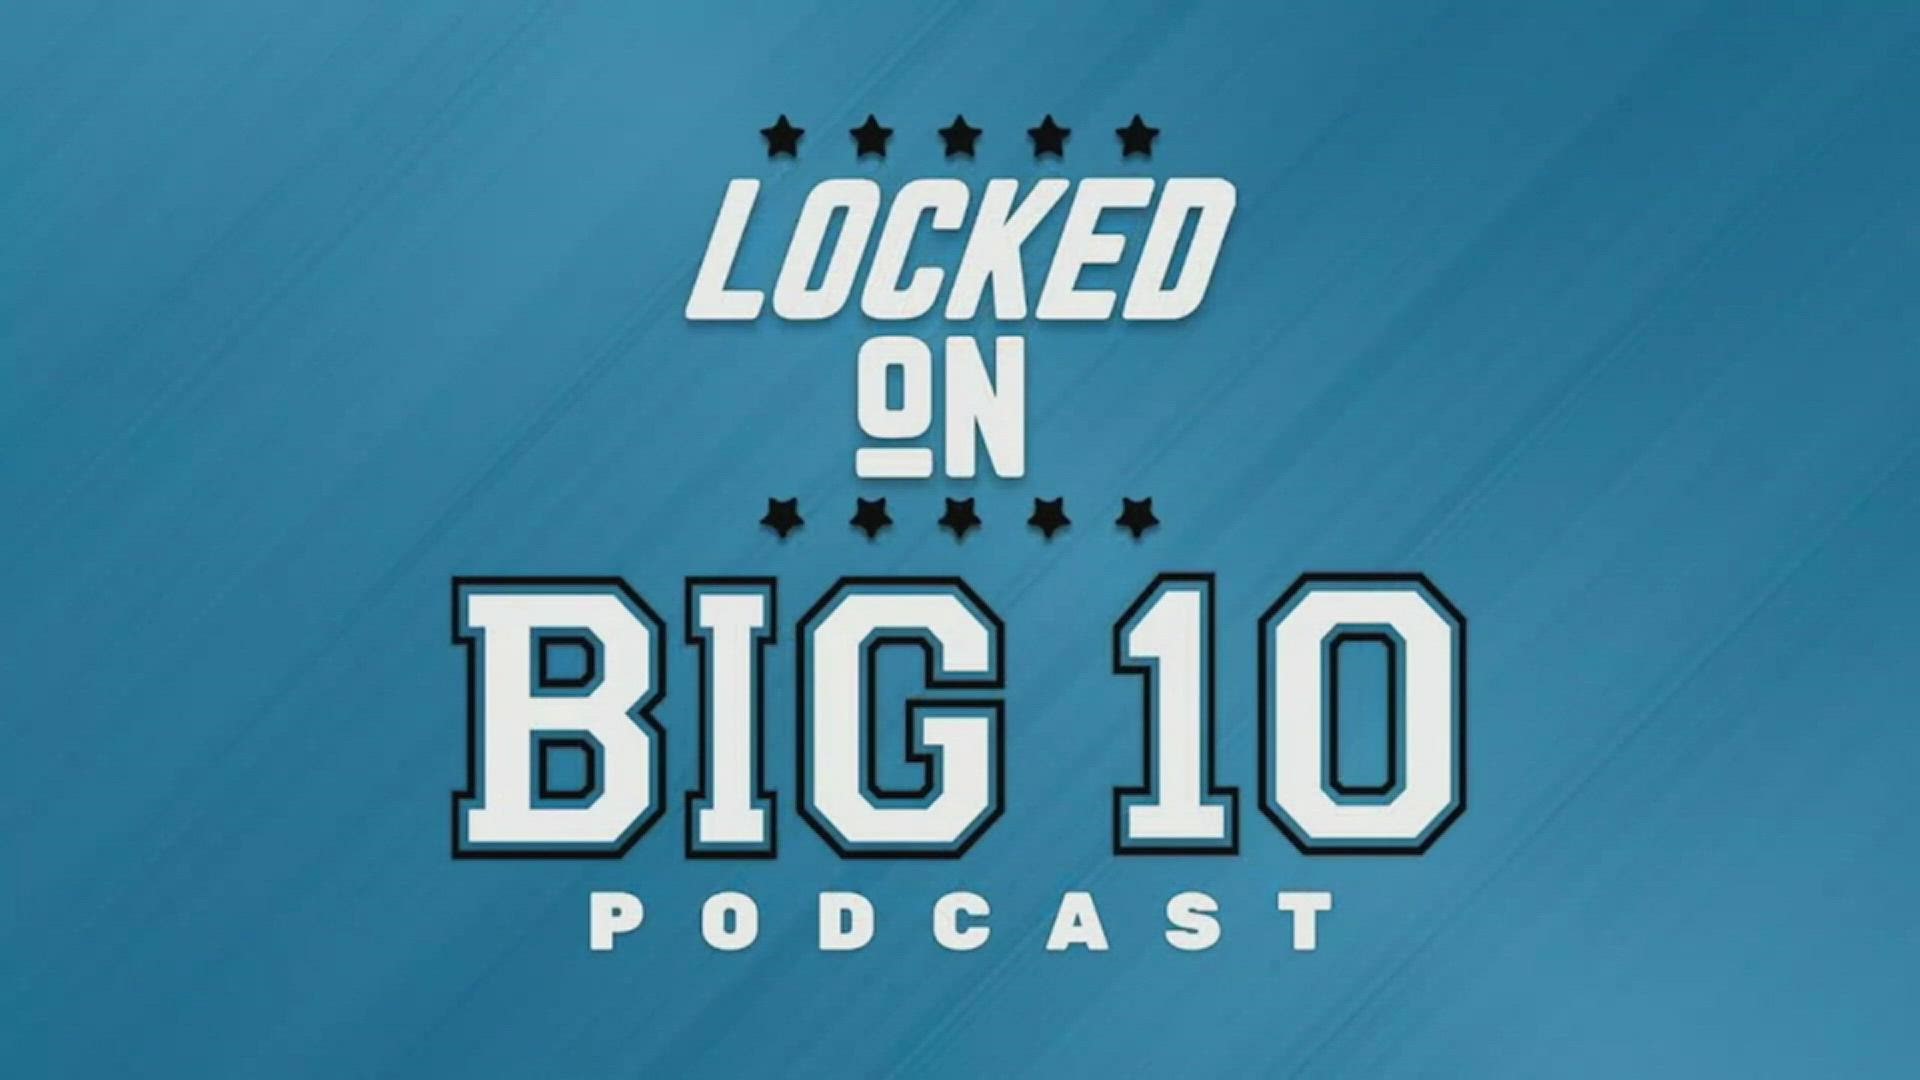 Nate Dickinson and Jay Stephens break down what they learned about the Big Ten in Week 1 of the college football season.